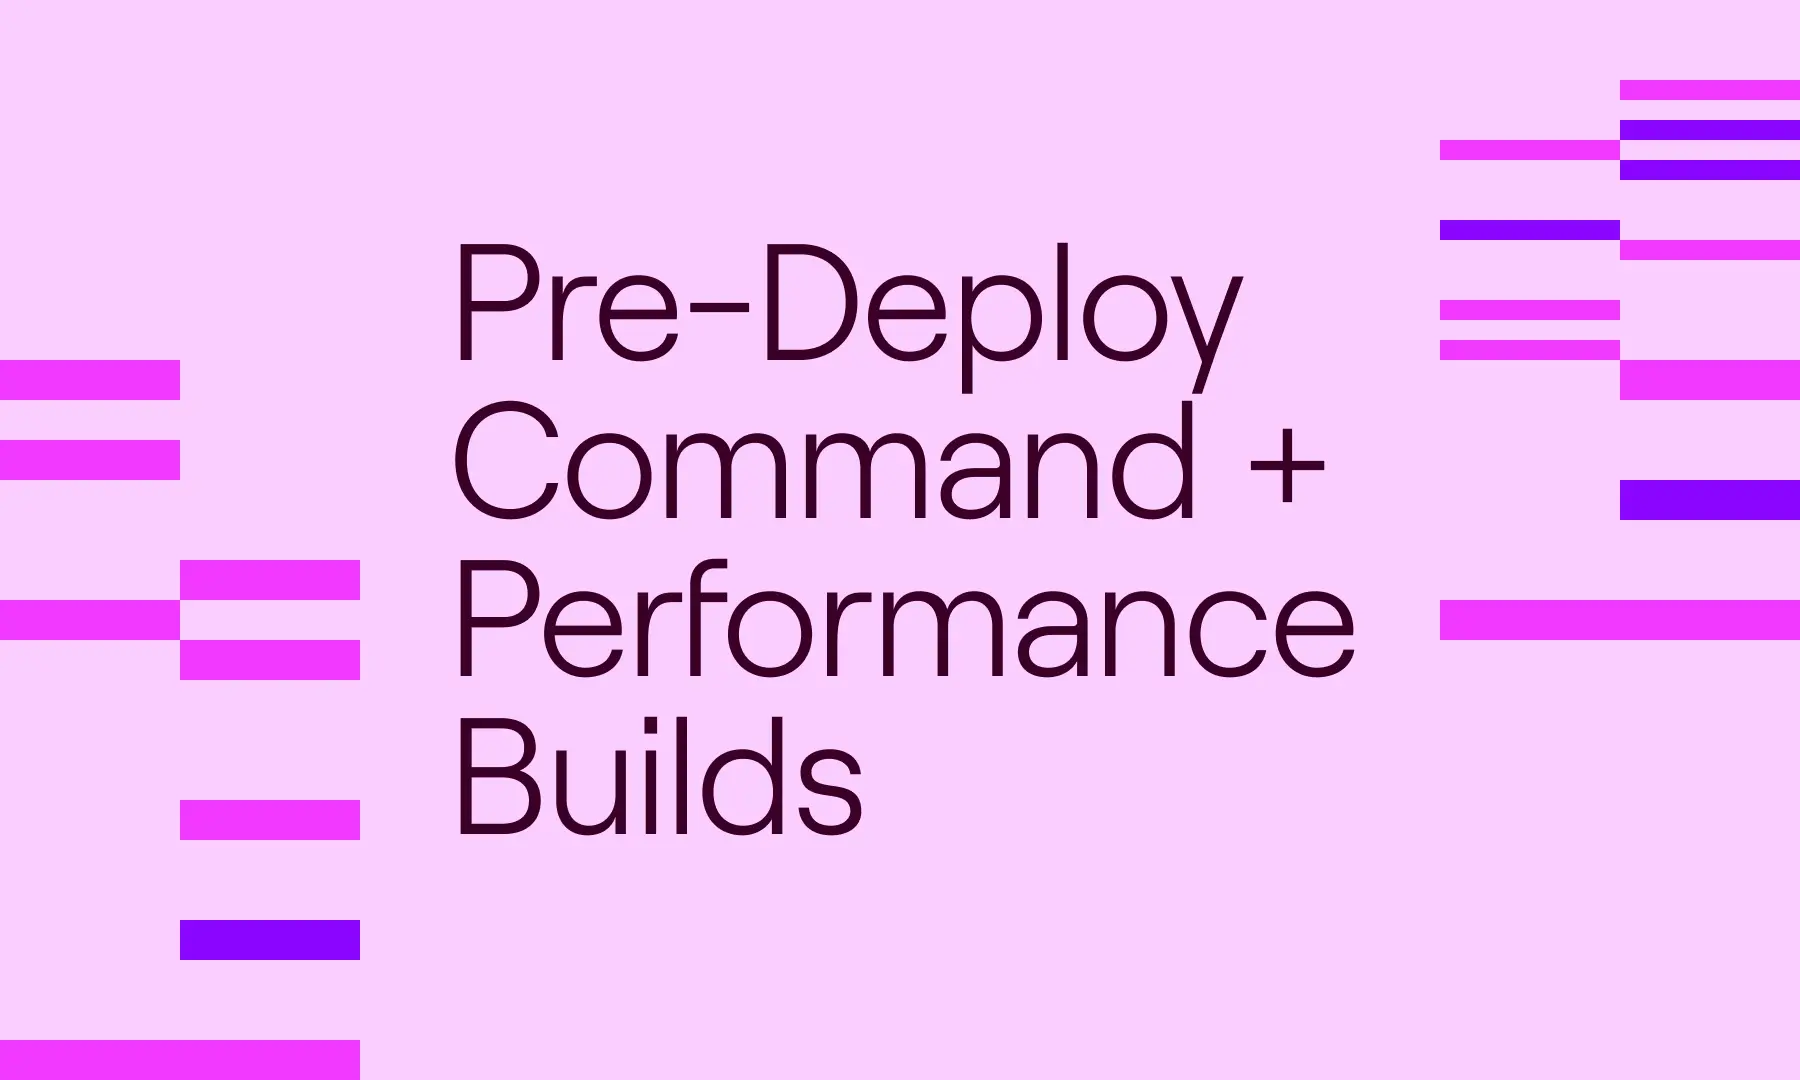 Making Builds More Flexible and Performant